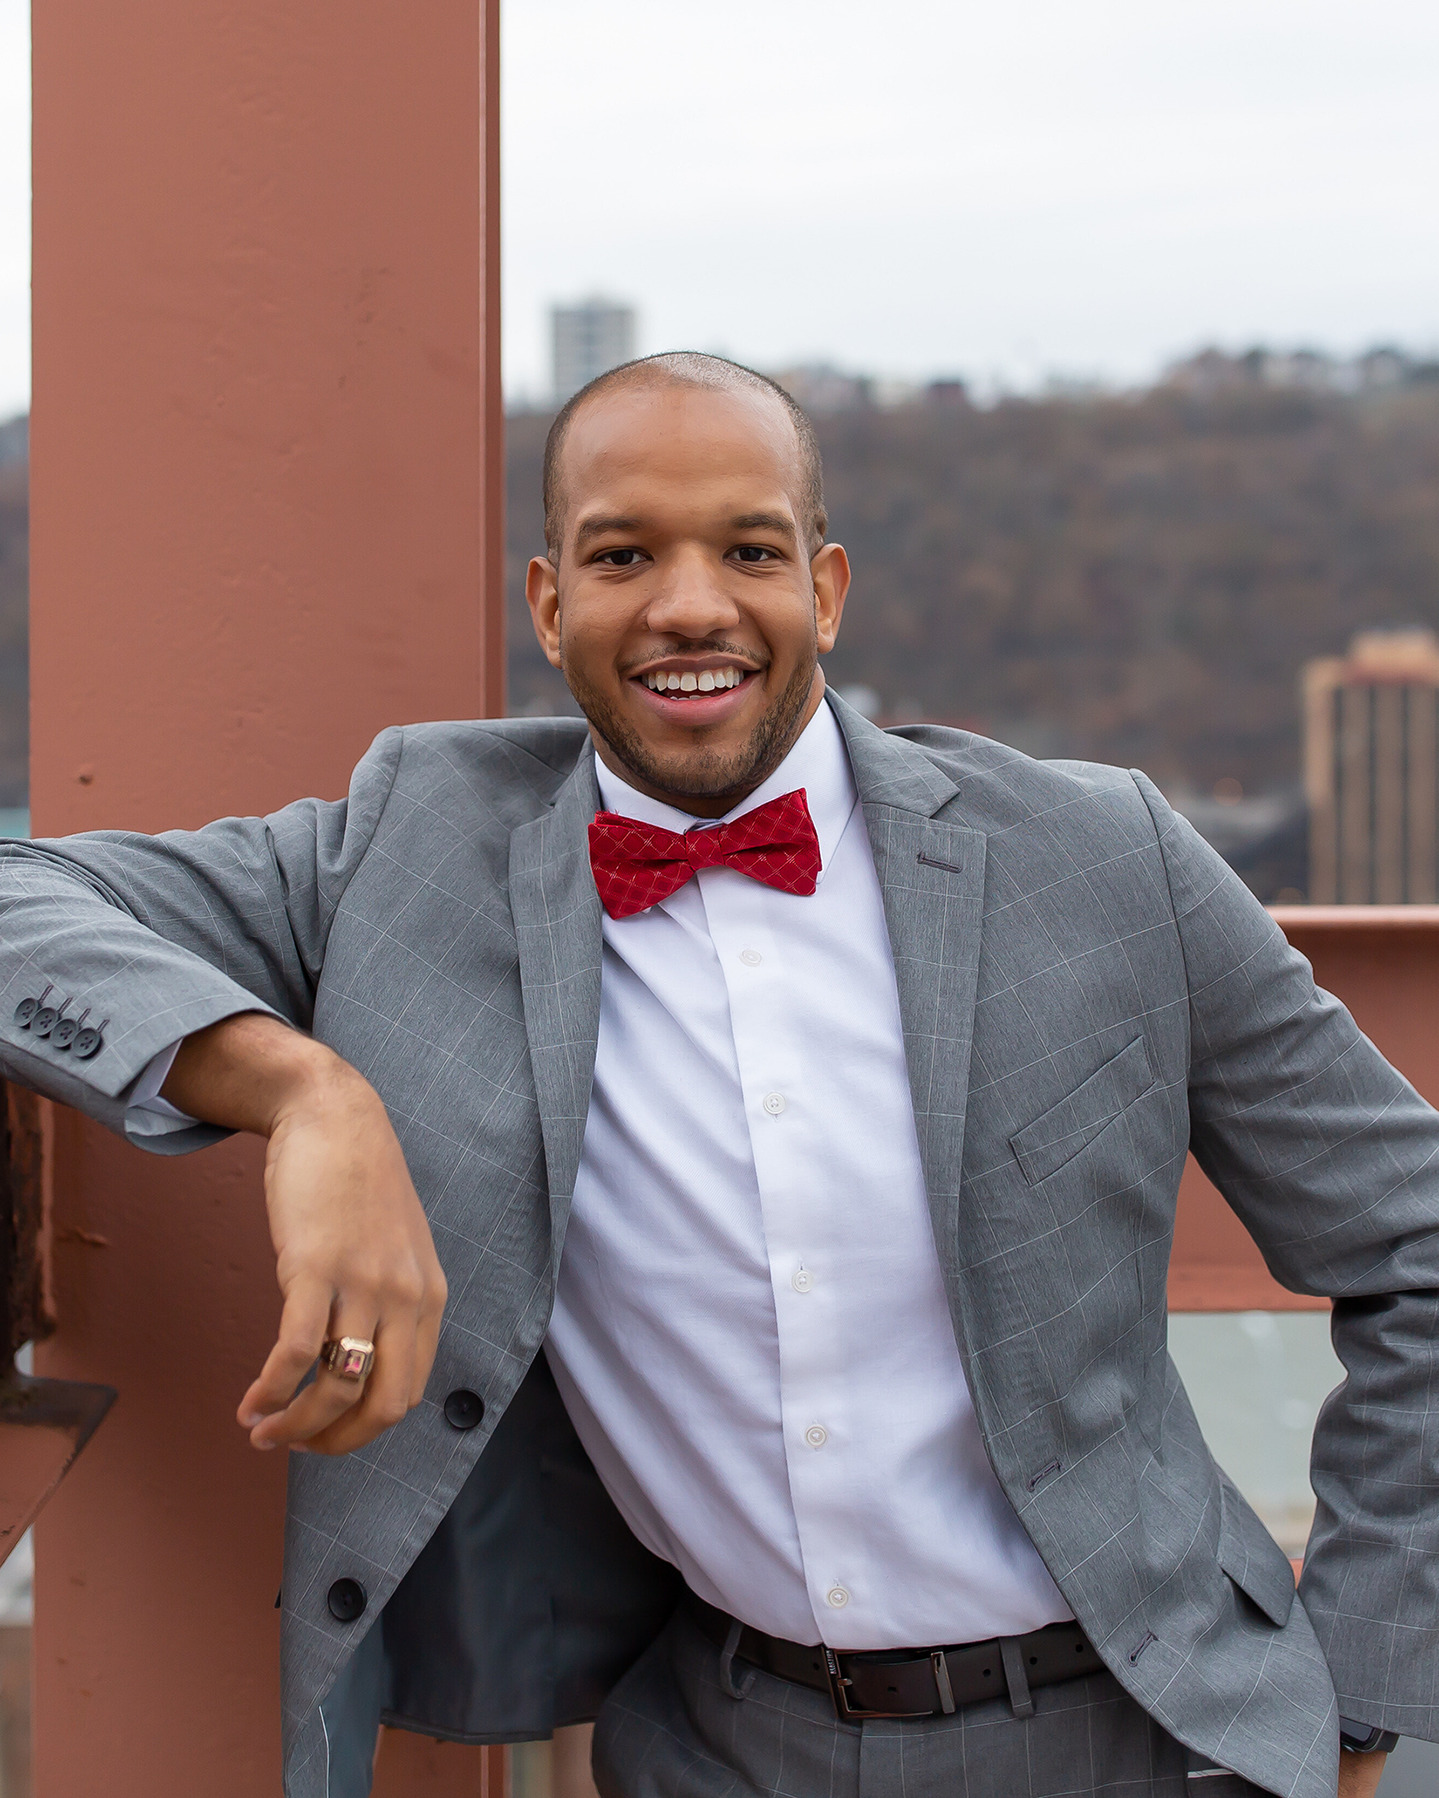 Black man wearing grey suit with red bow tie in industrial setting